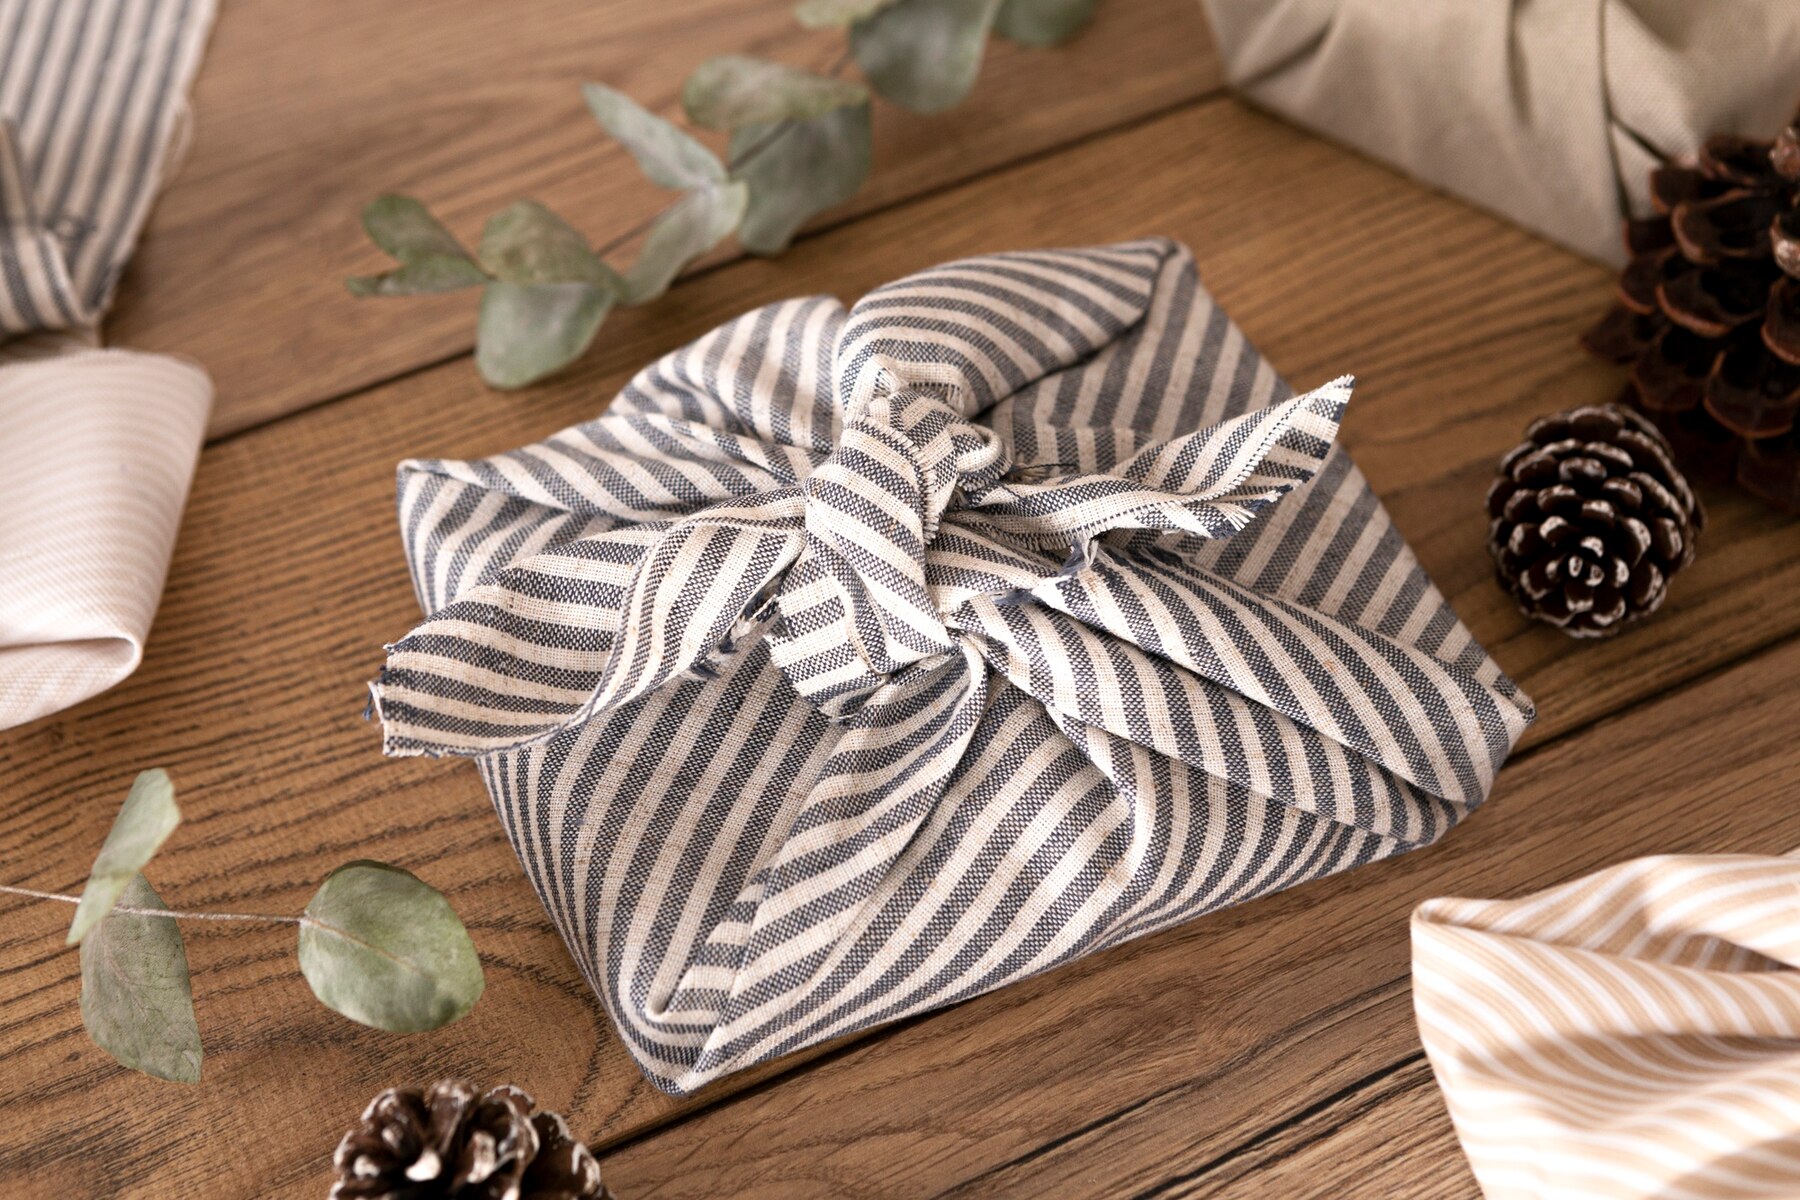 Benefits of Gift Wrapping Without Box